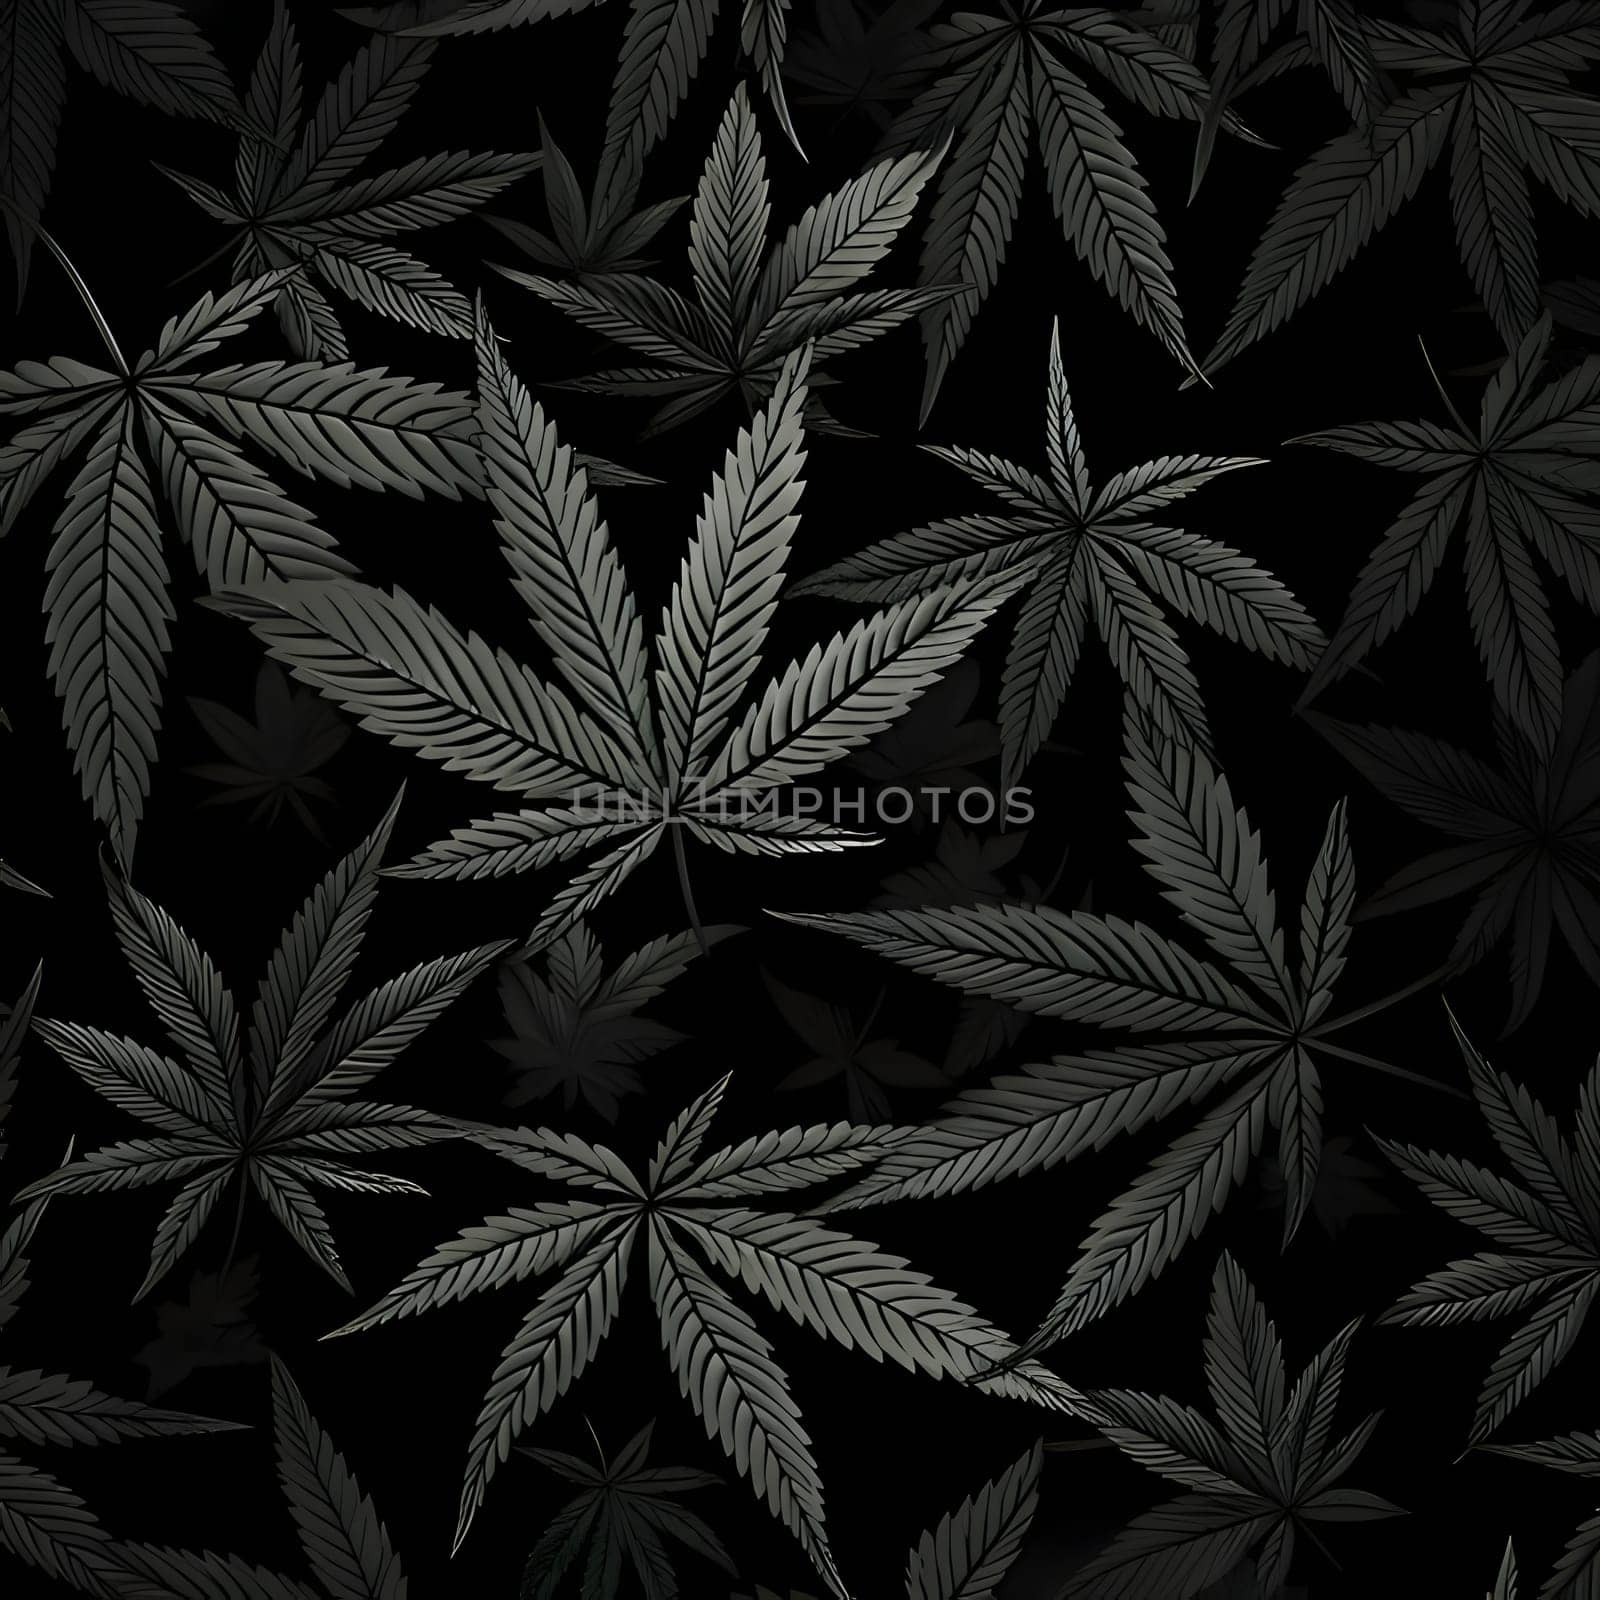 Patterns and banners backgrounds: Seamless pattern of cannabis leaves on black background. Vector illustration.